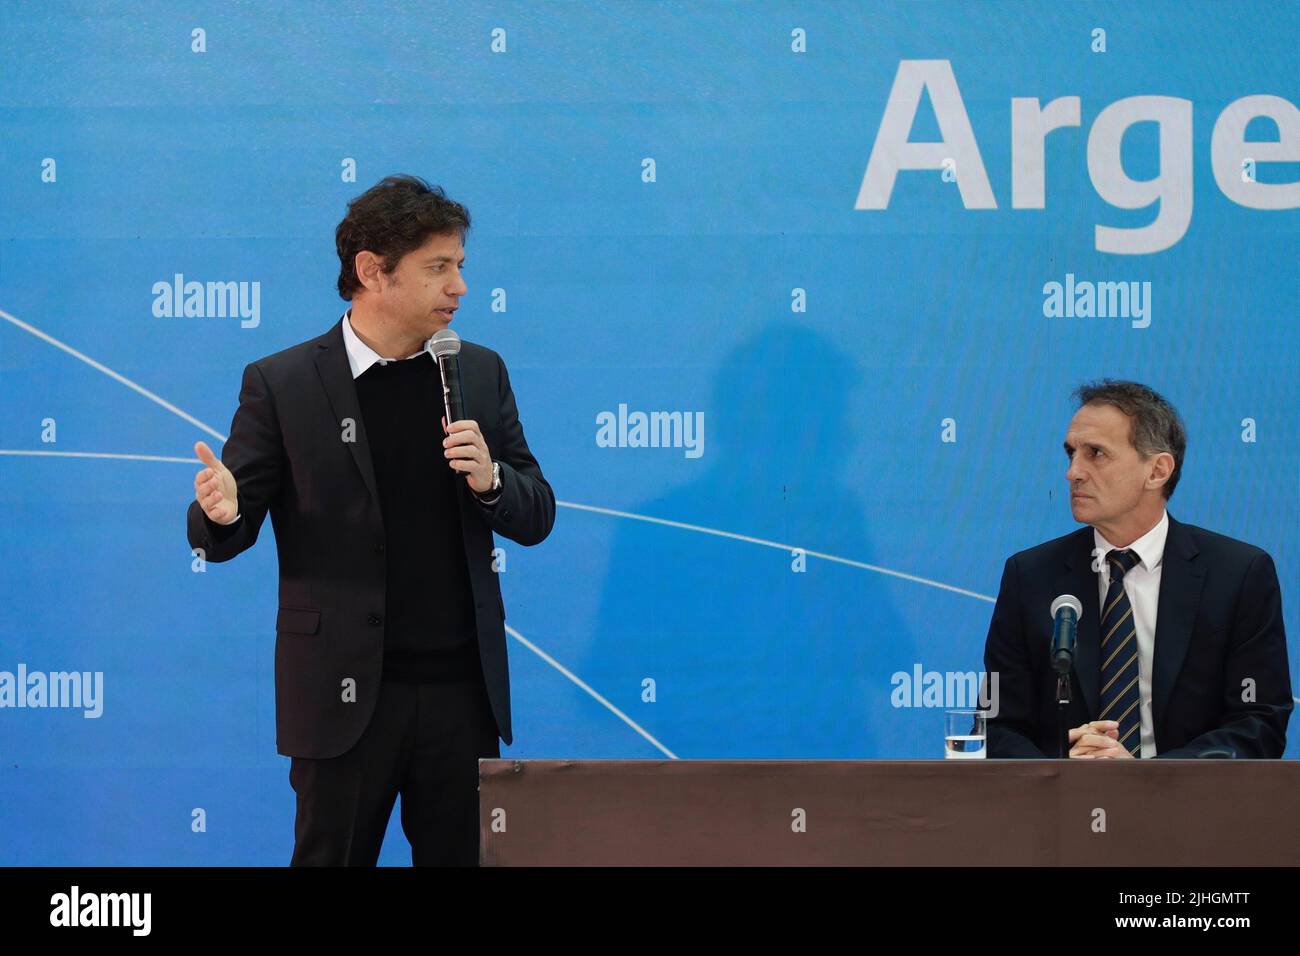 Buenos Aires, 18th July 2022. President Alberto Fernández led the presentation of Argentina Grande, Infrastructure Plan for the Development of the Nation, together with the Minister of Public Works, Gabriel Katopodis. The Governor of the Province of Buenos Aires Axel Kicillof giving a few words at the event.(Credit: Esteban Osorio/Alamy Live News) Stock Photo